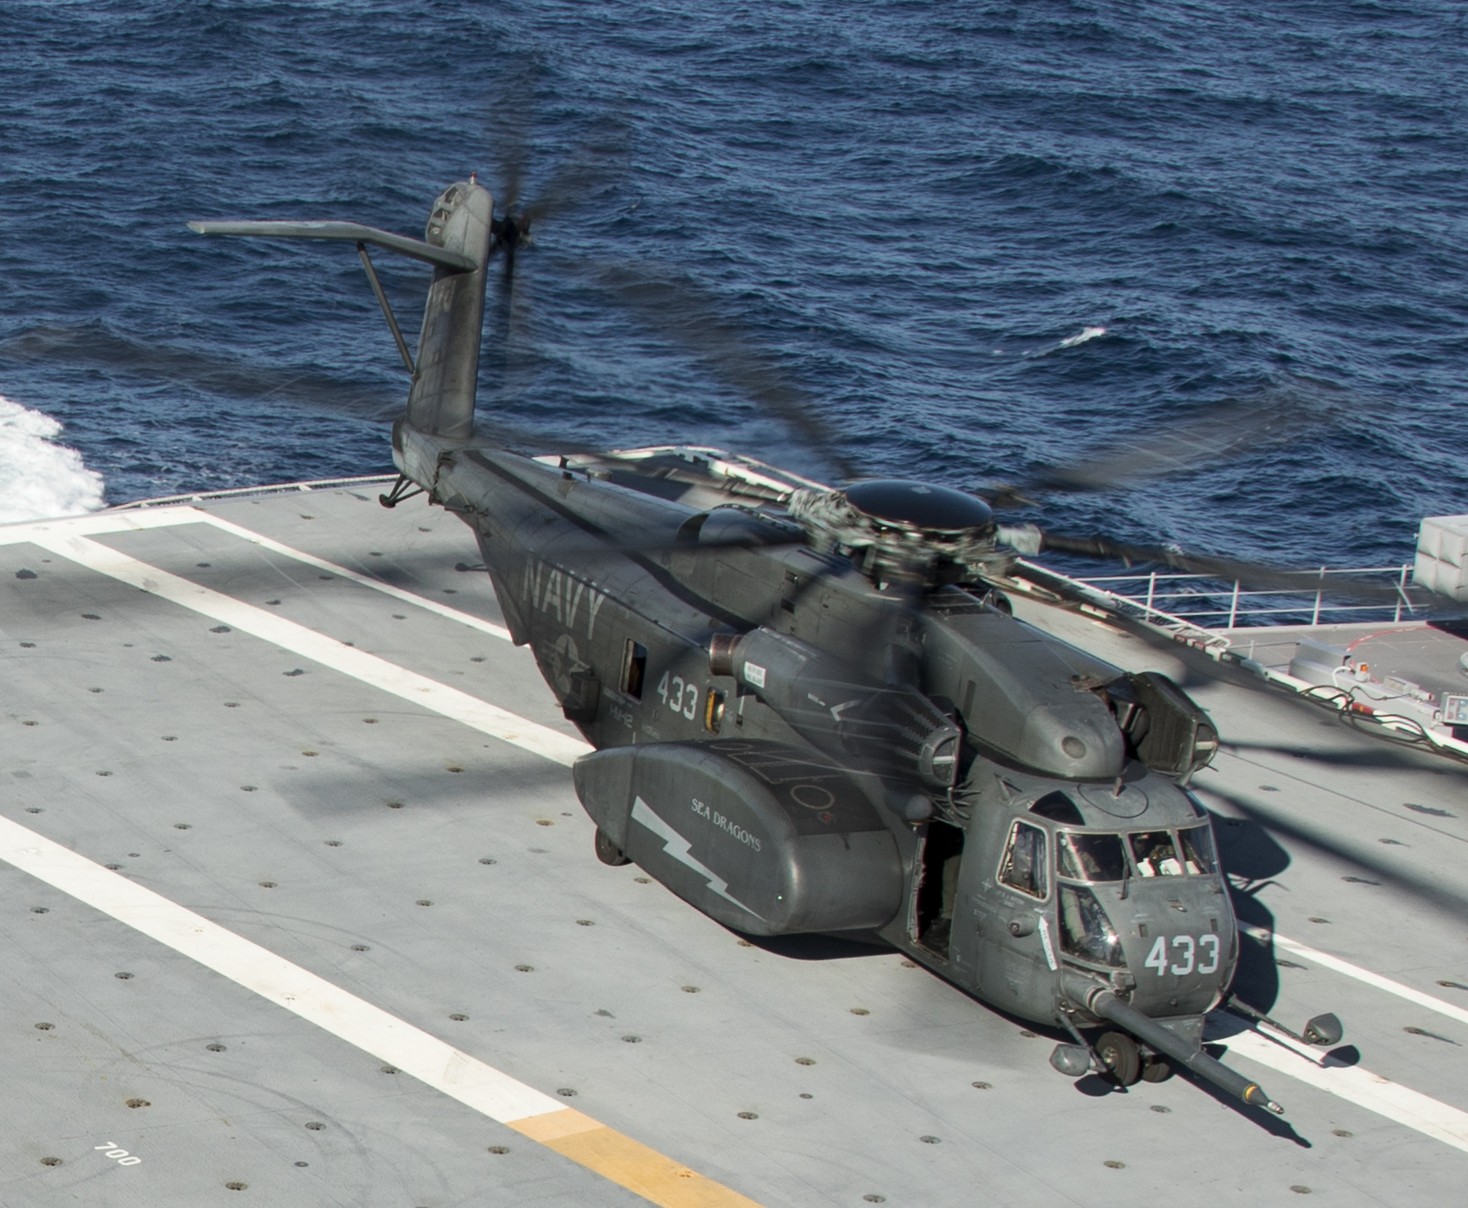 hm-12 sea dragons helicopter mine countermeasures squadron navy mh-53d sea dragon 22 uss gerald r. ford cvn-78